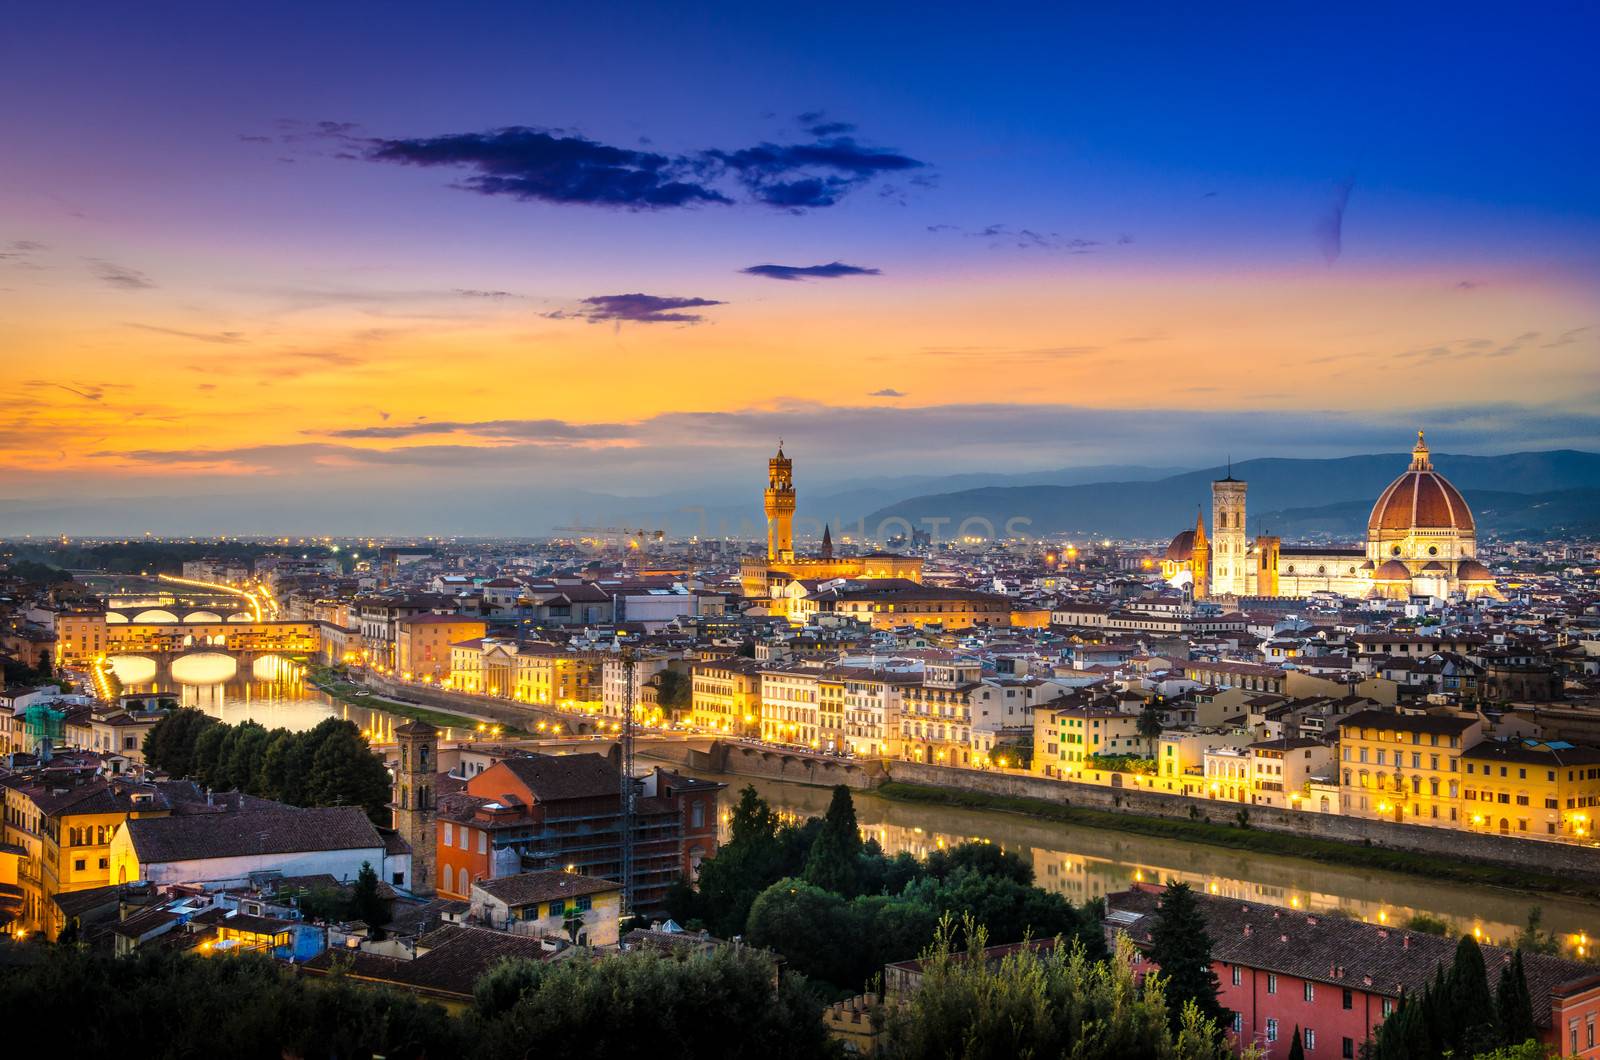 Scenic view of Florence after sunset from Piazzale Michelangelo, Florence, Italy